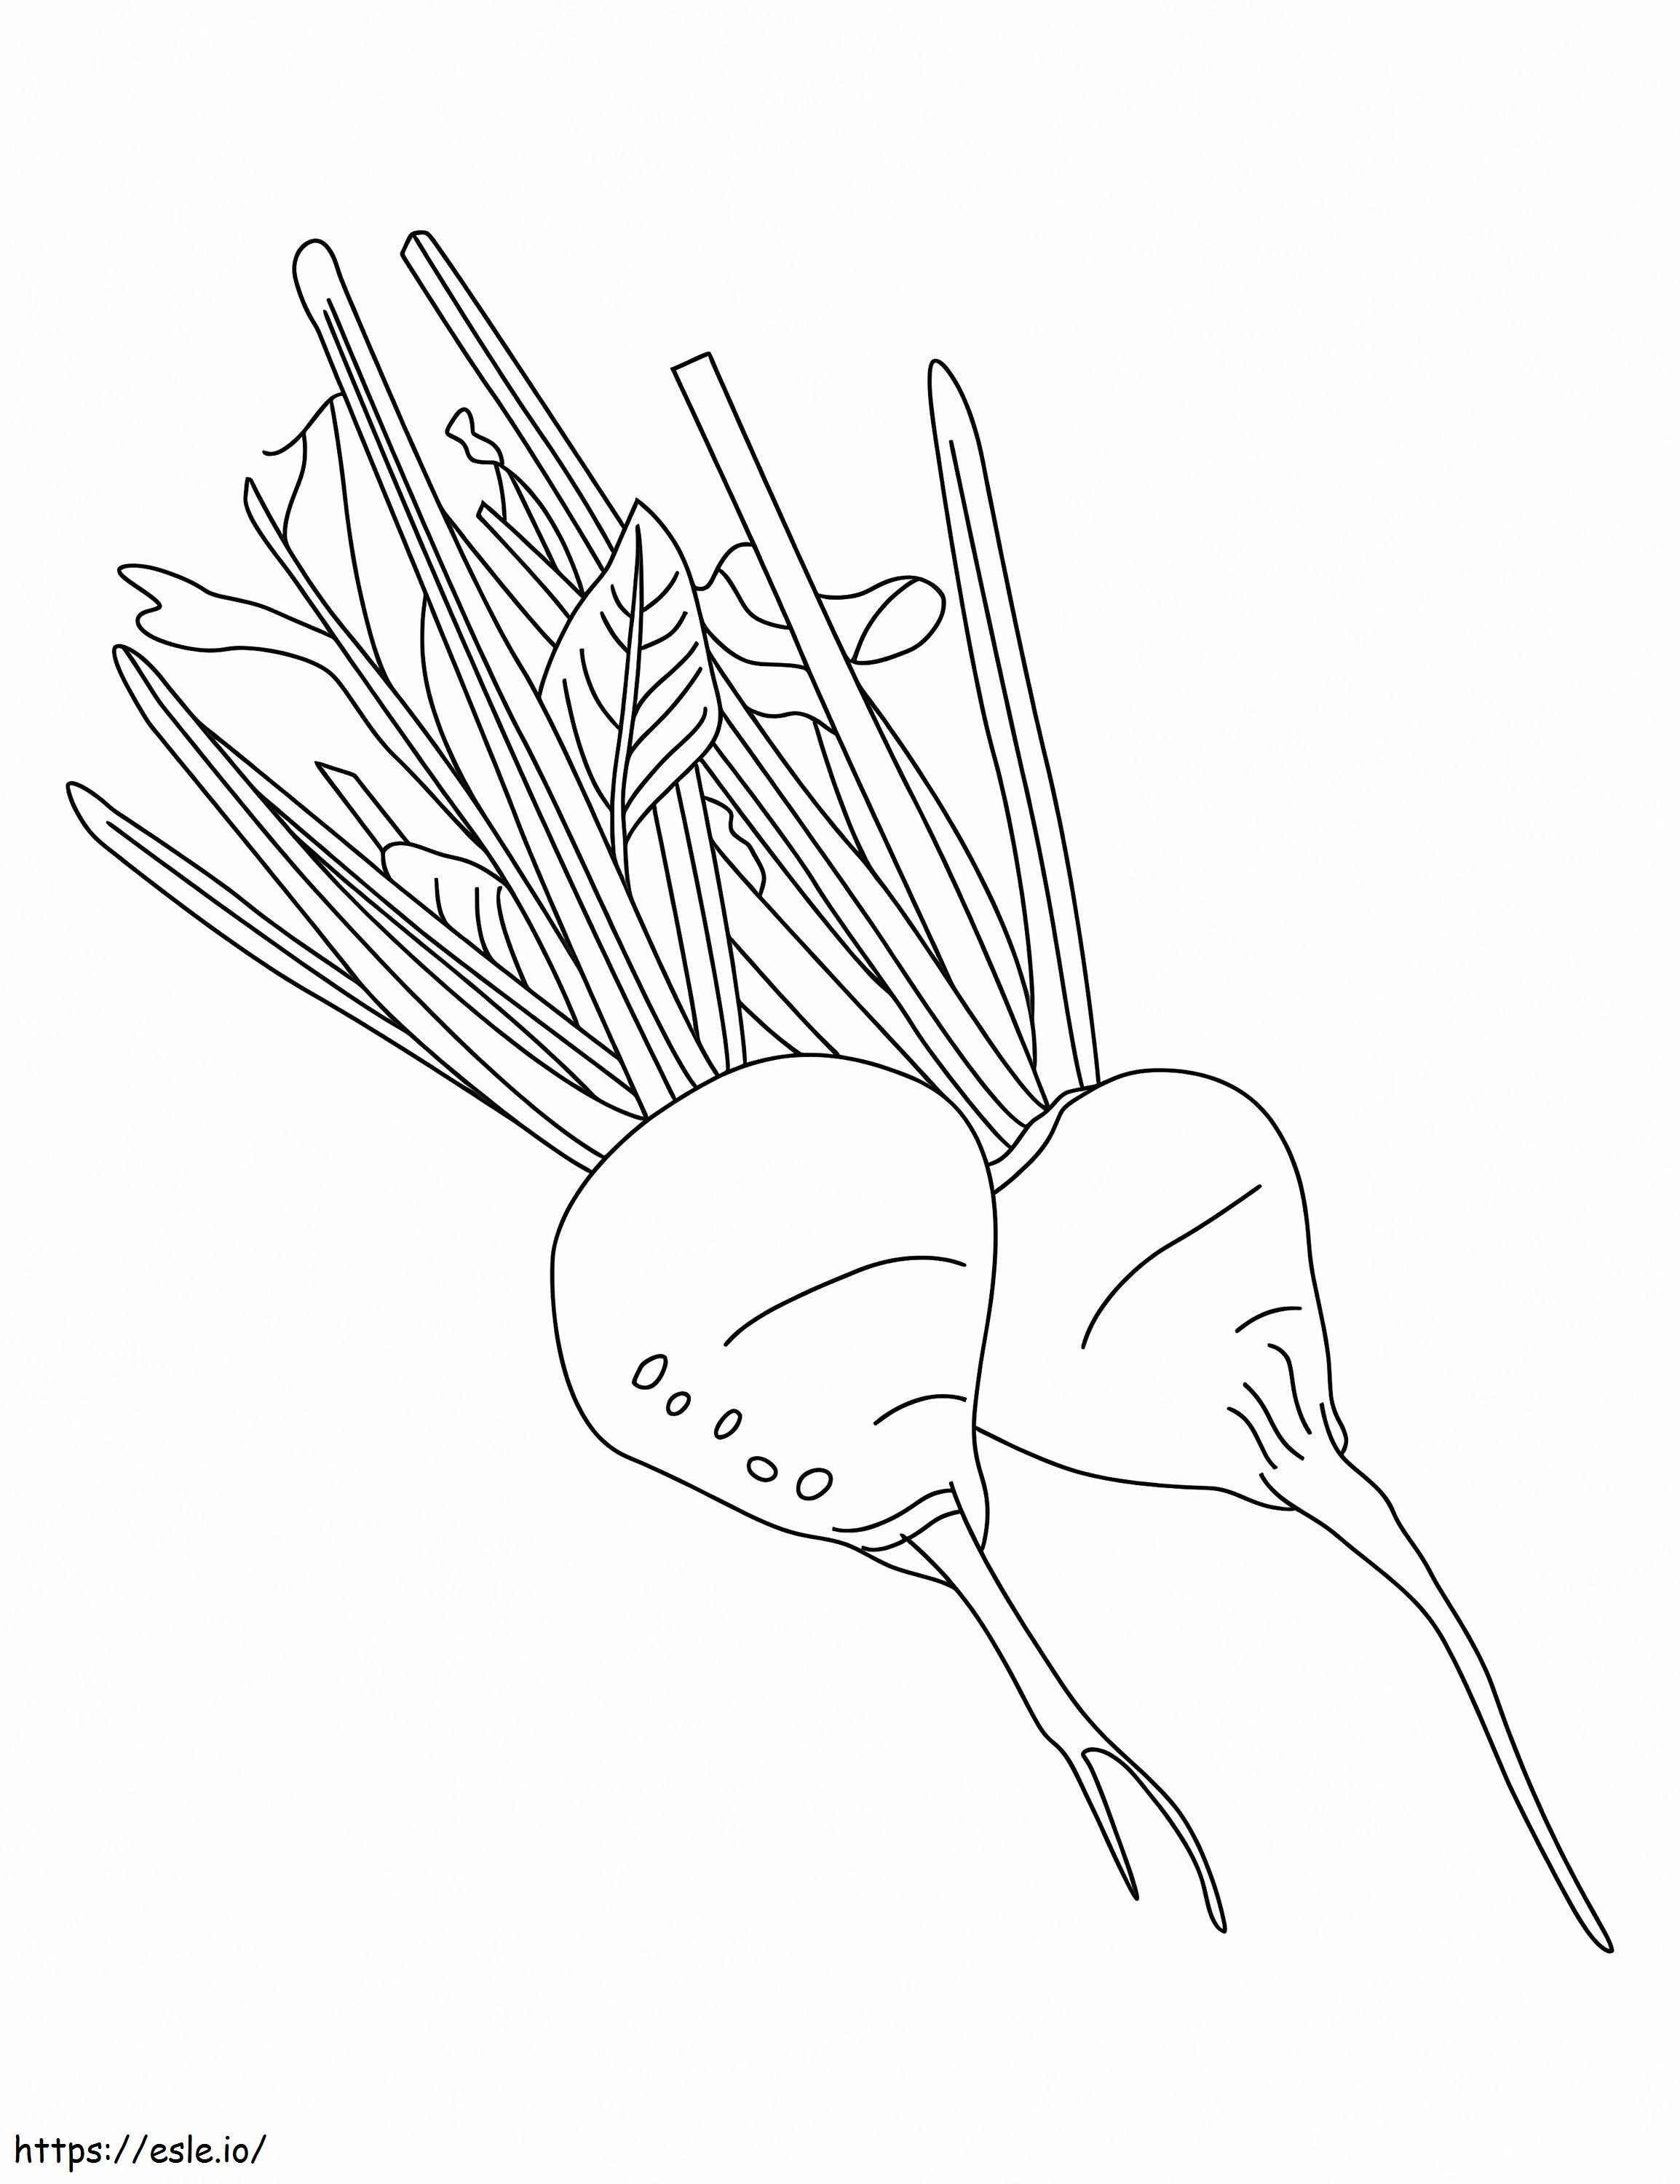 Two Beetroots coloring page